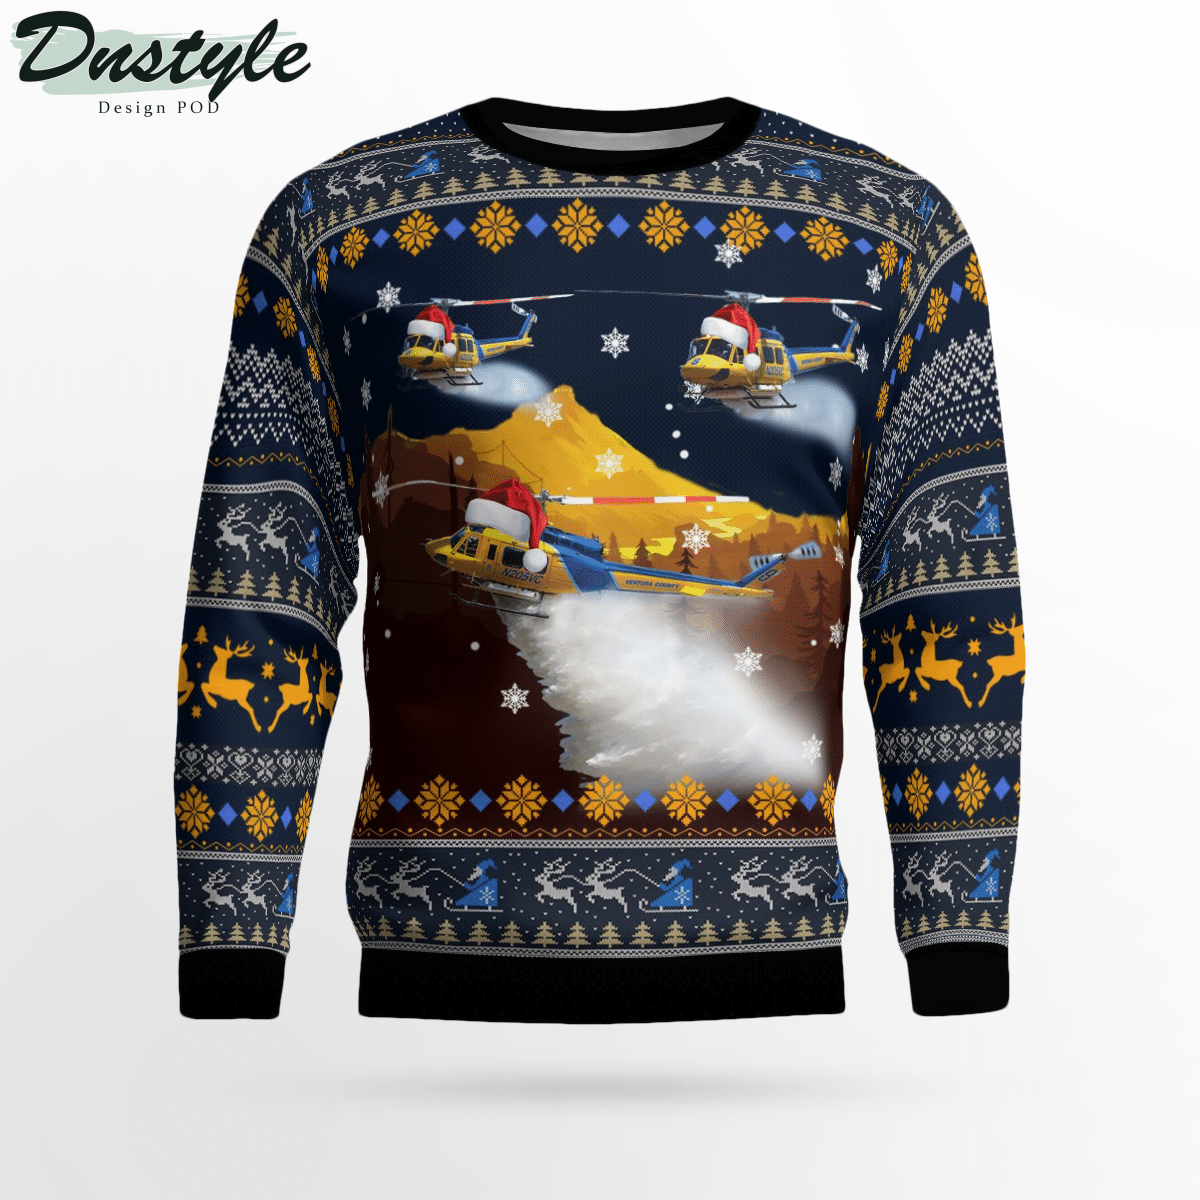 Ventura County Sheriff Fire Support Bell 205A-1 Ugly Christmas Sweater